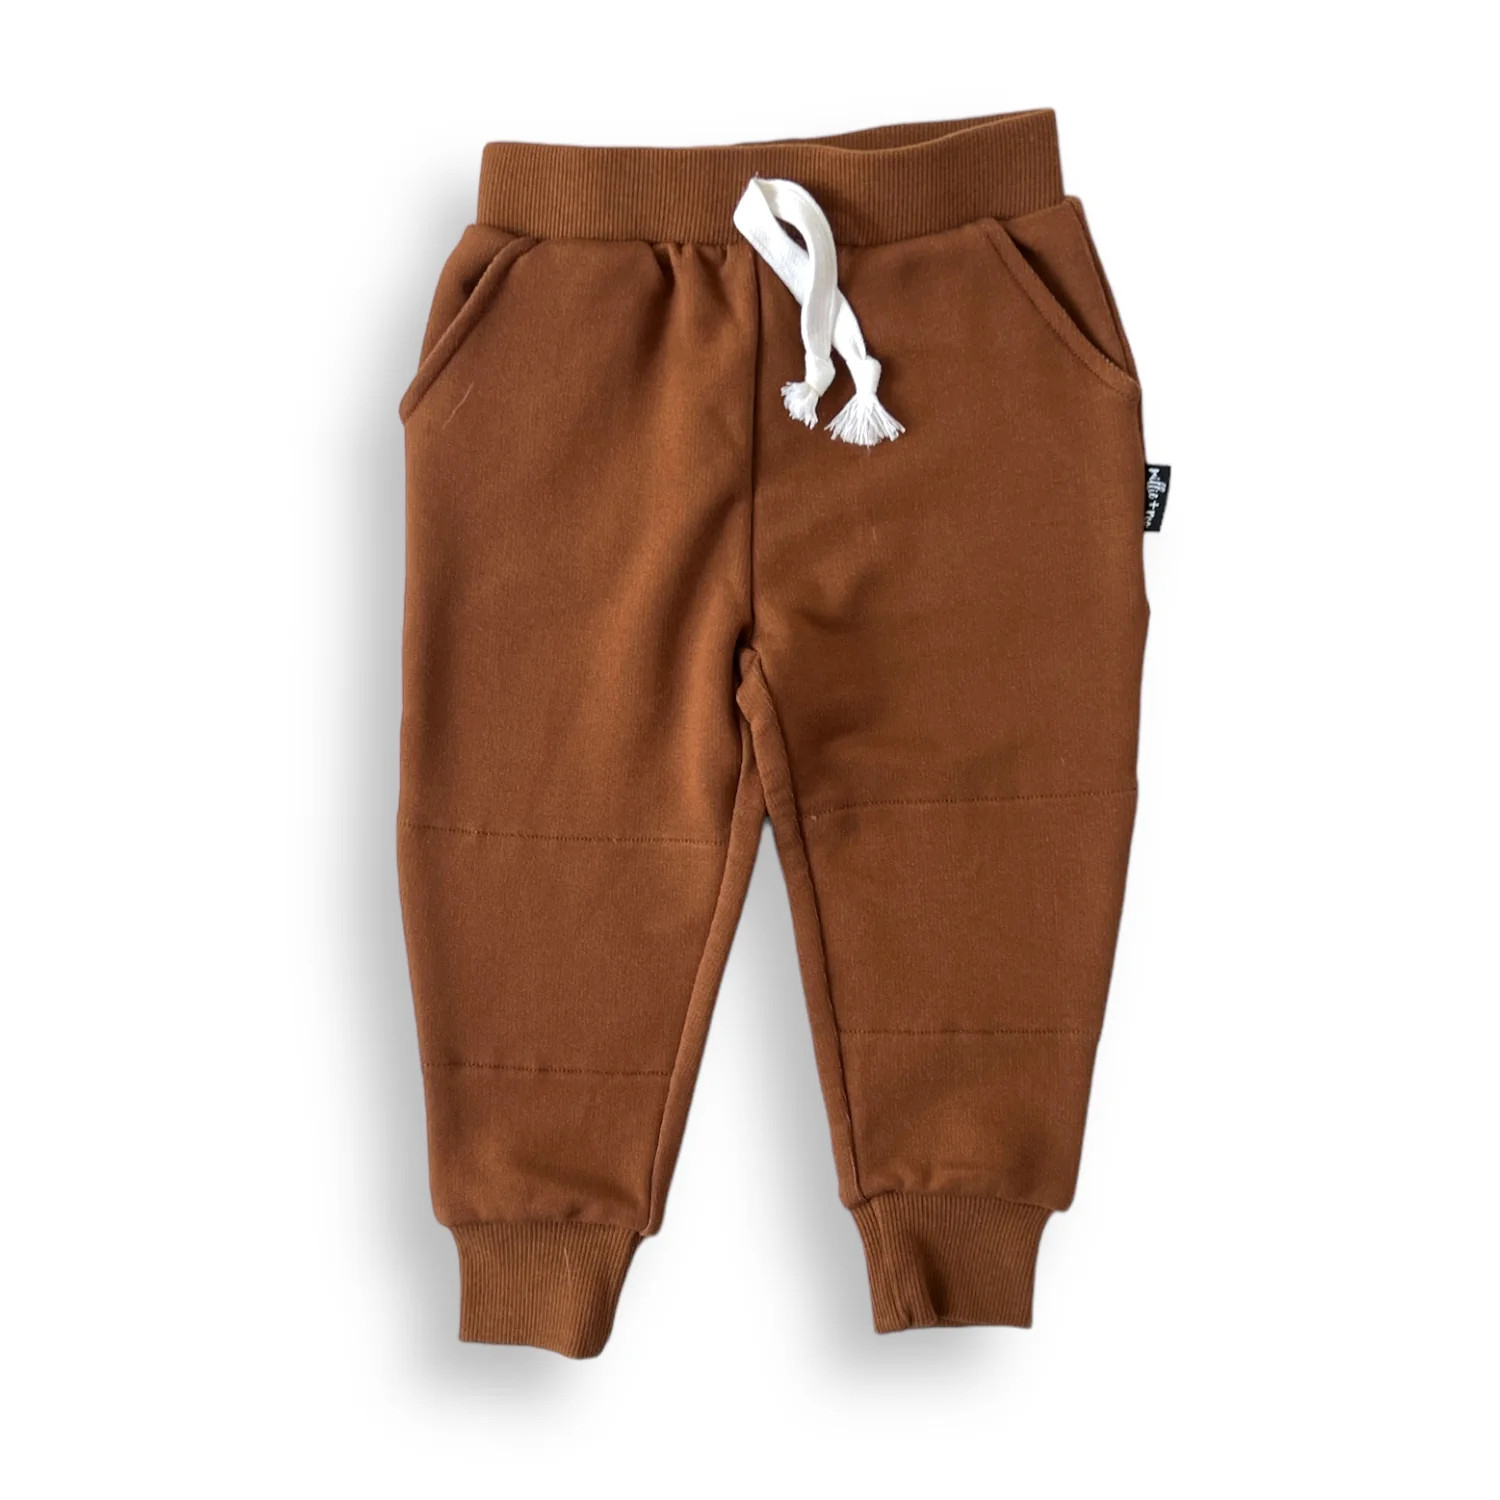 JOGGERS- Bark Bamboo French Terry | millie + roo